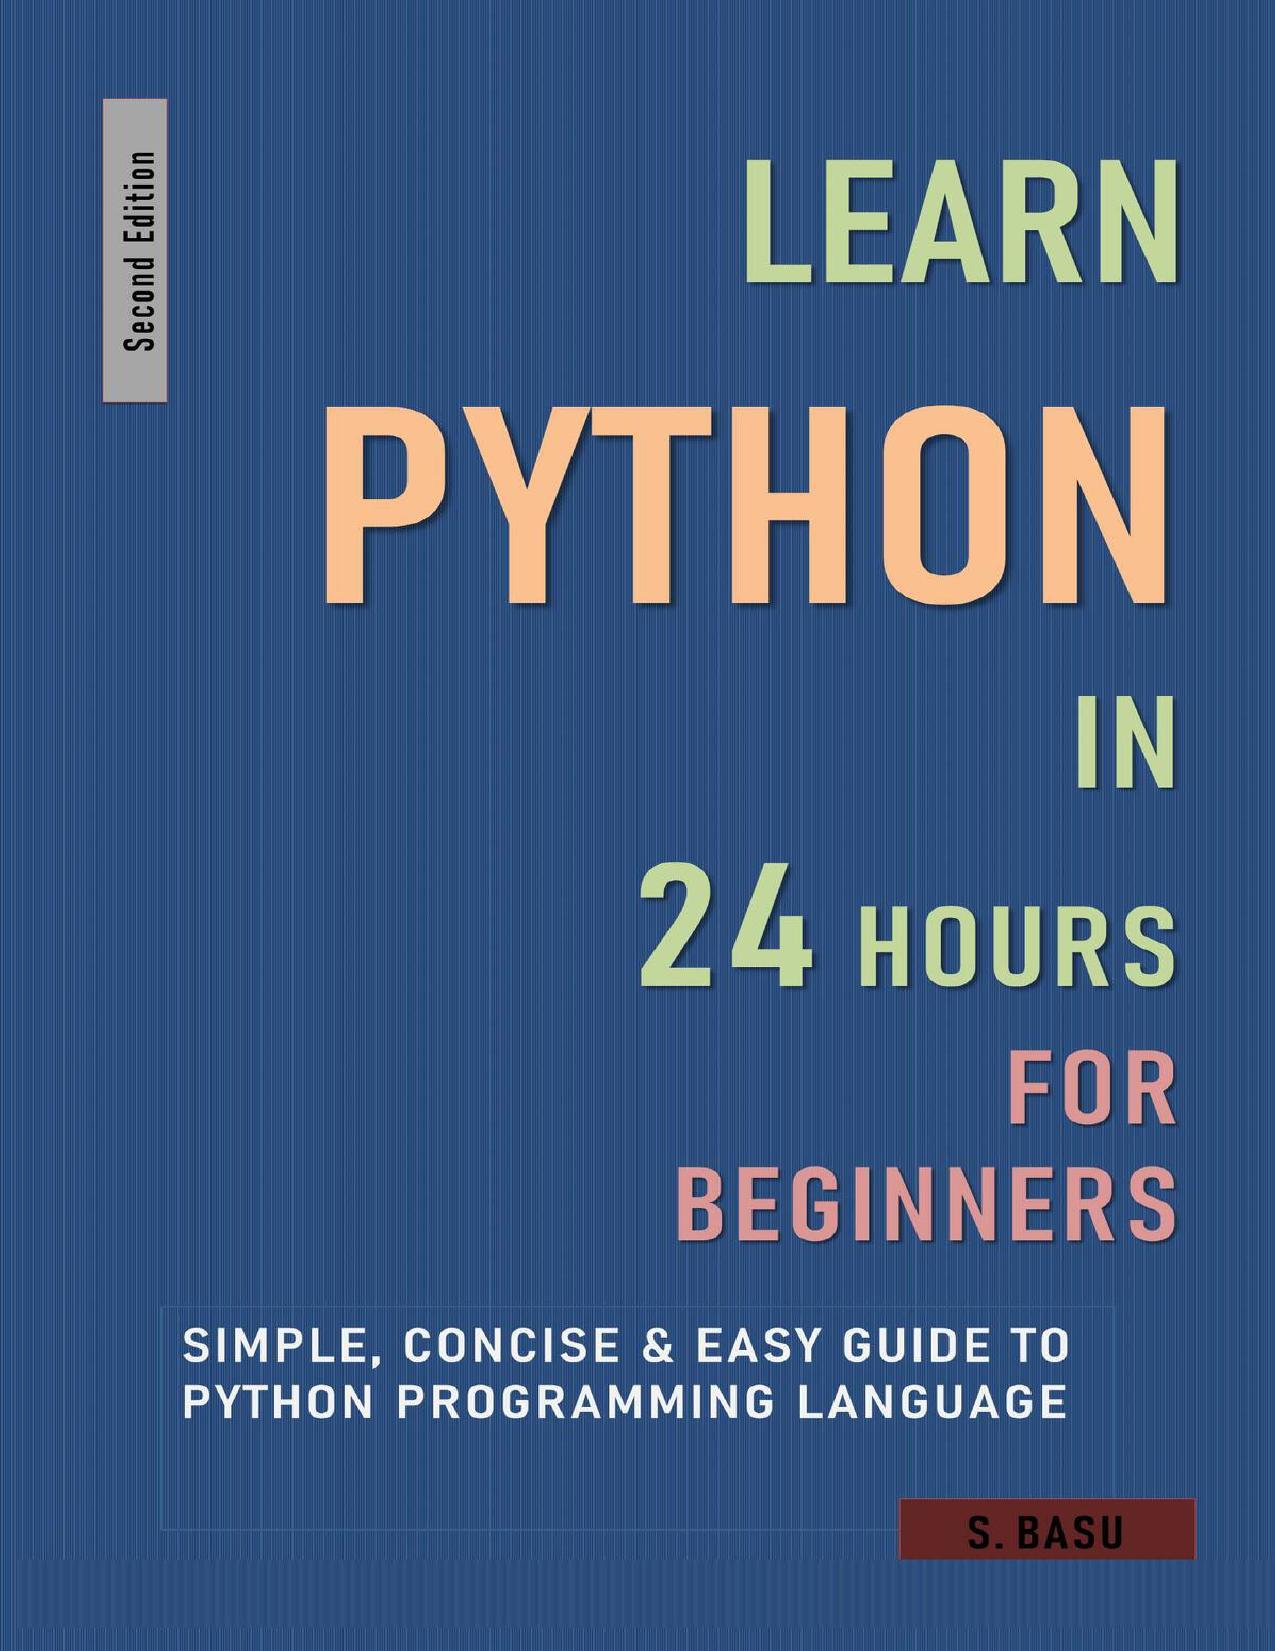 Learn Python in 24 Hours for Beginners - Simple, Concise & Easy Guide to Python Programming Language